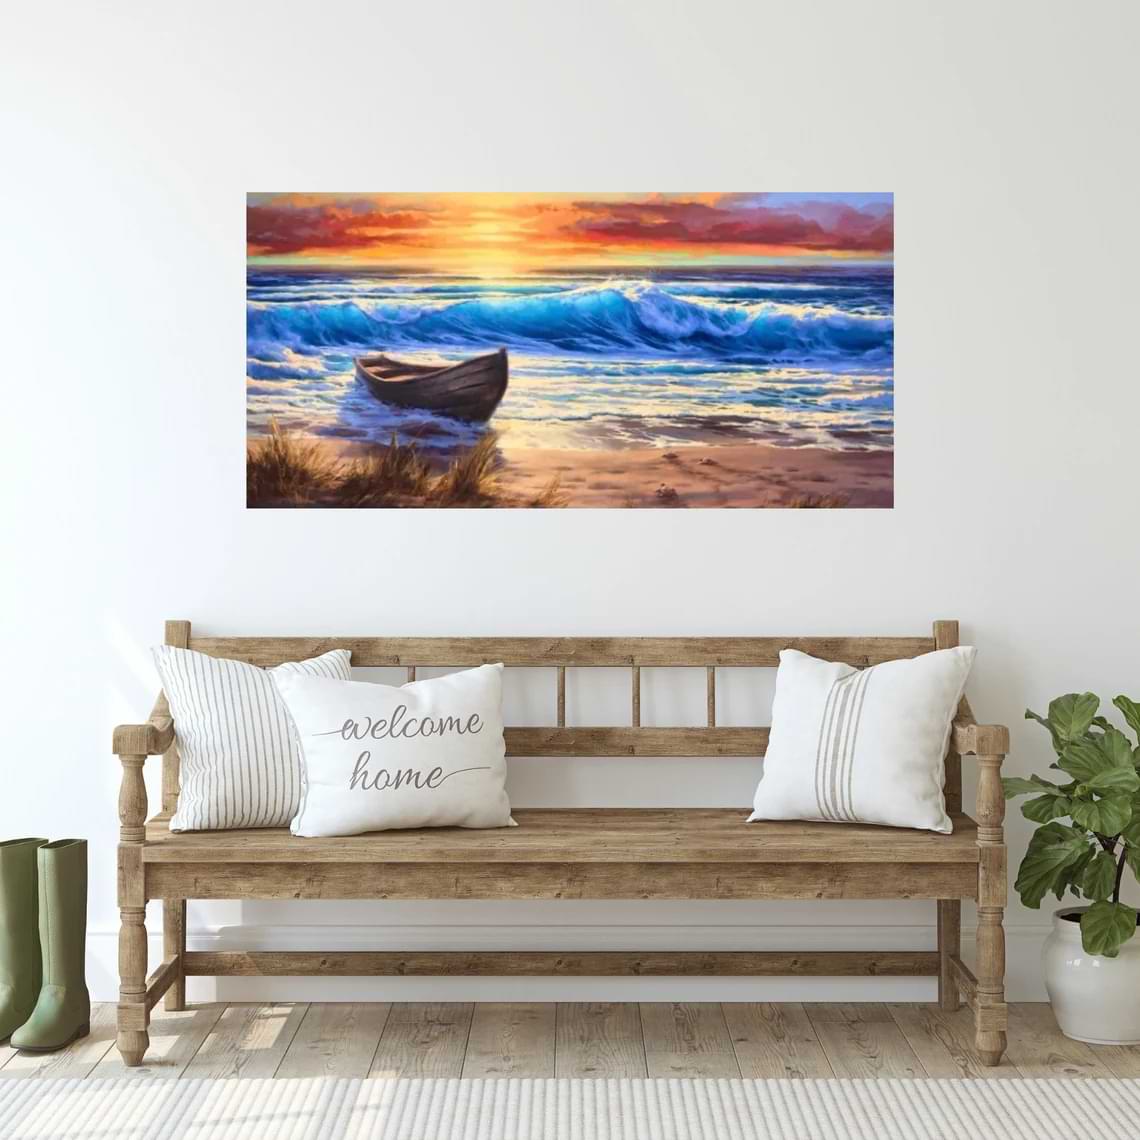 "The Calling" - Seascape Artwork Sample on Wall